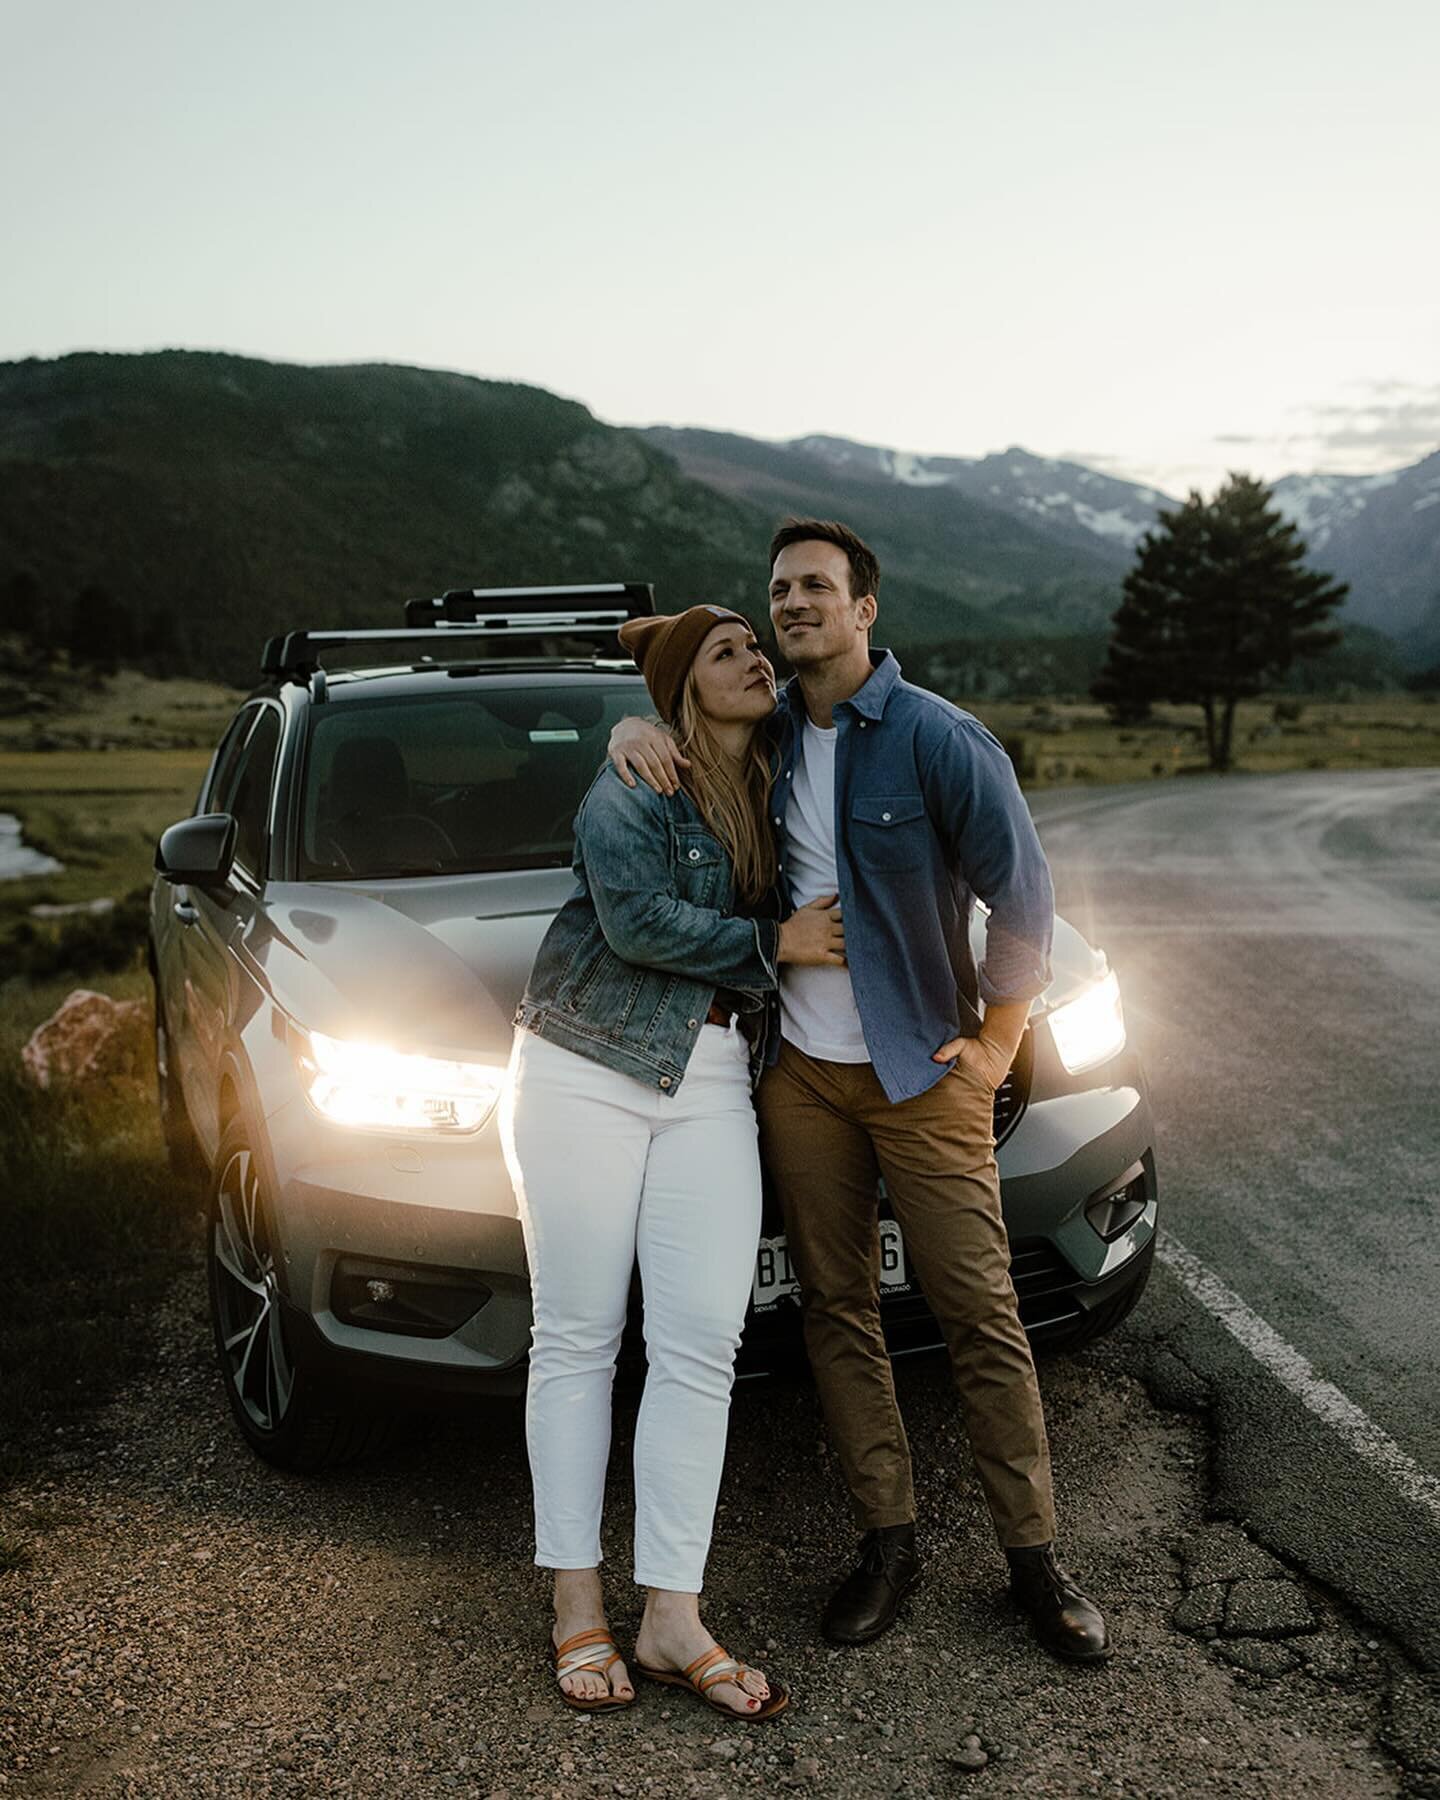 SUVS. Beanies. Mountains. Making out. The end of this awesome engagement session was peak Colorado vibes and I am here for it.